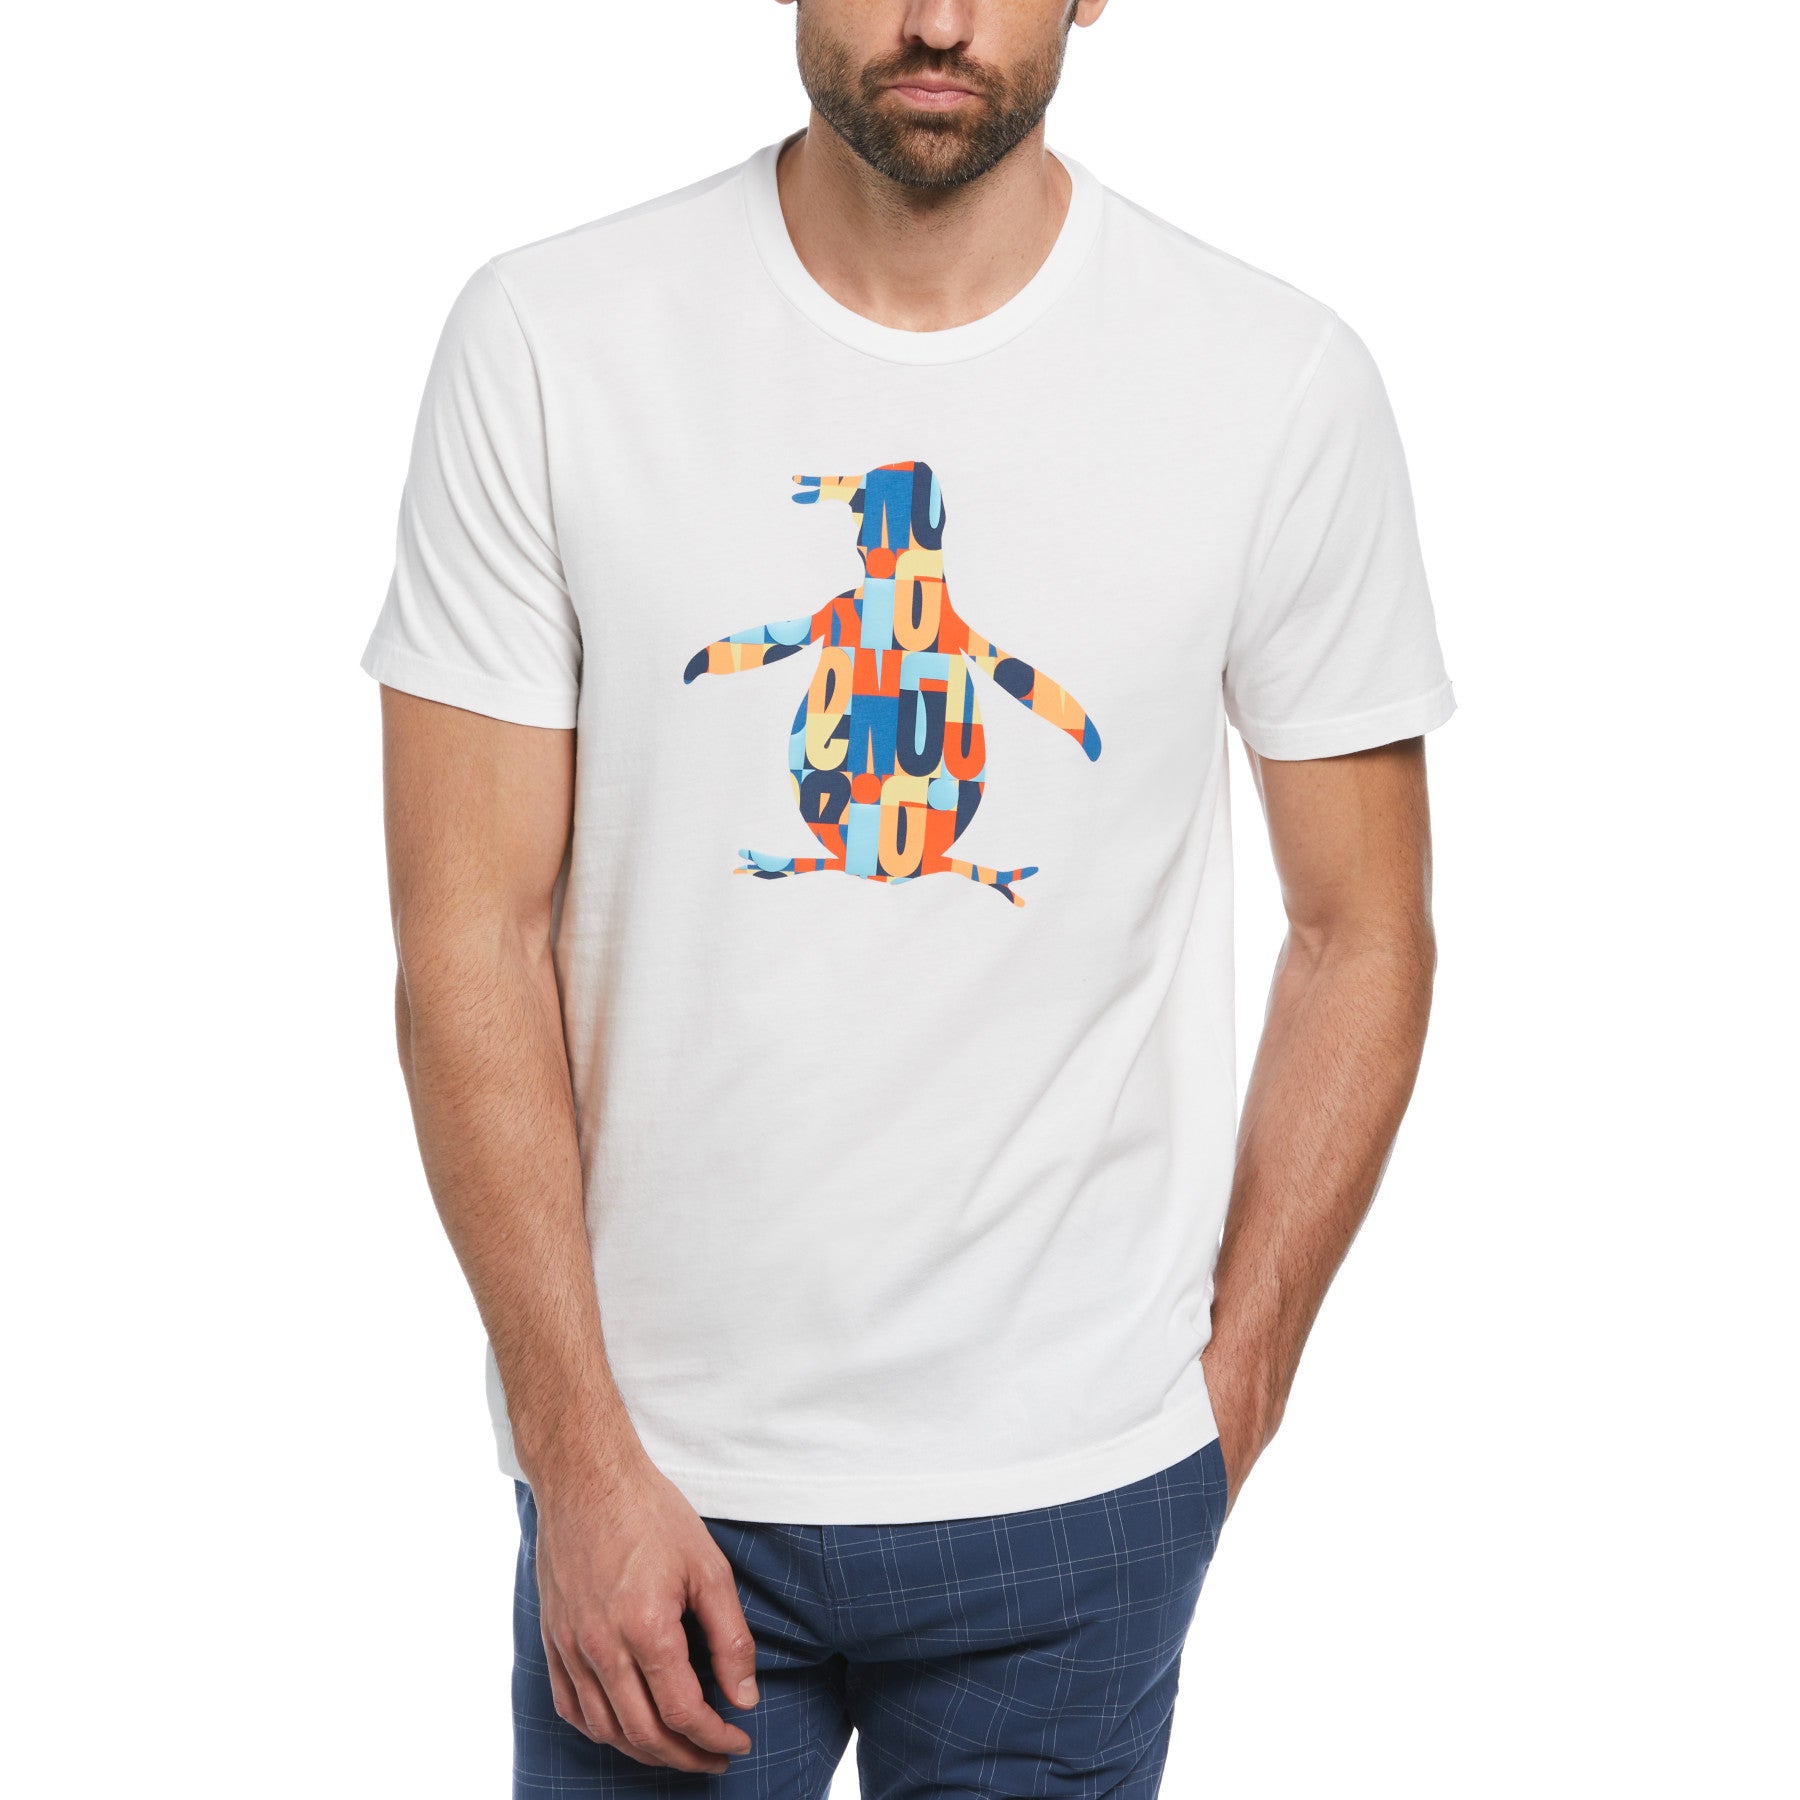 View Pete Graphic TShirt In Bright White information